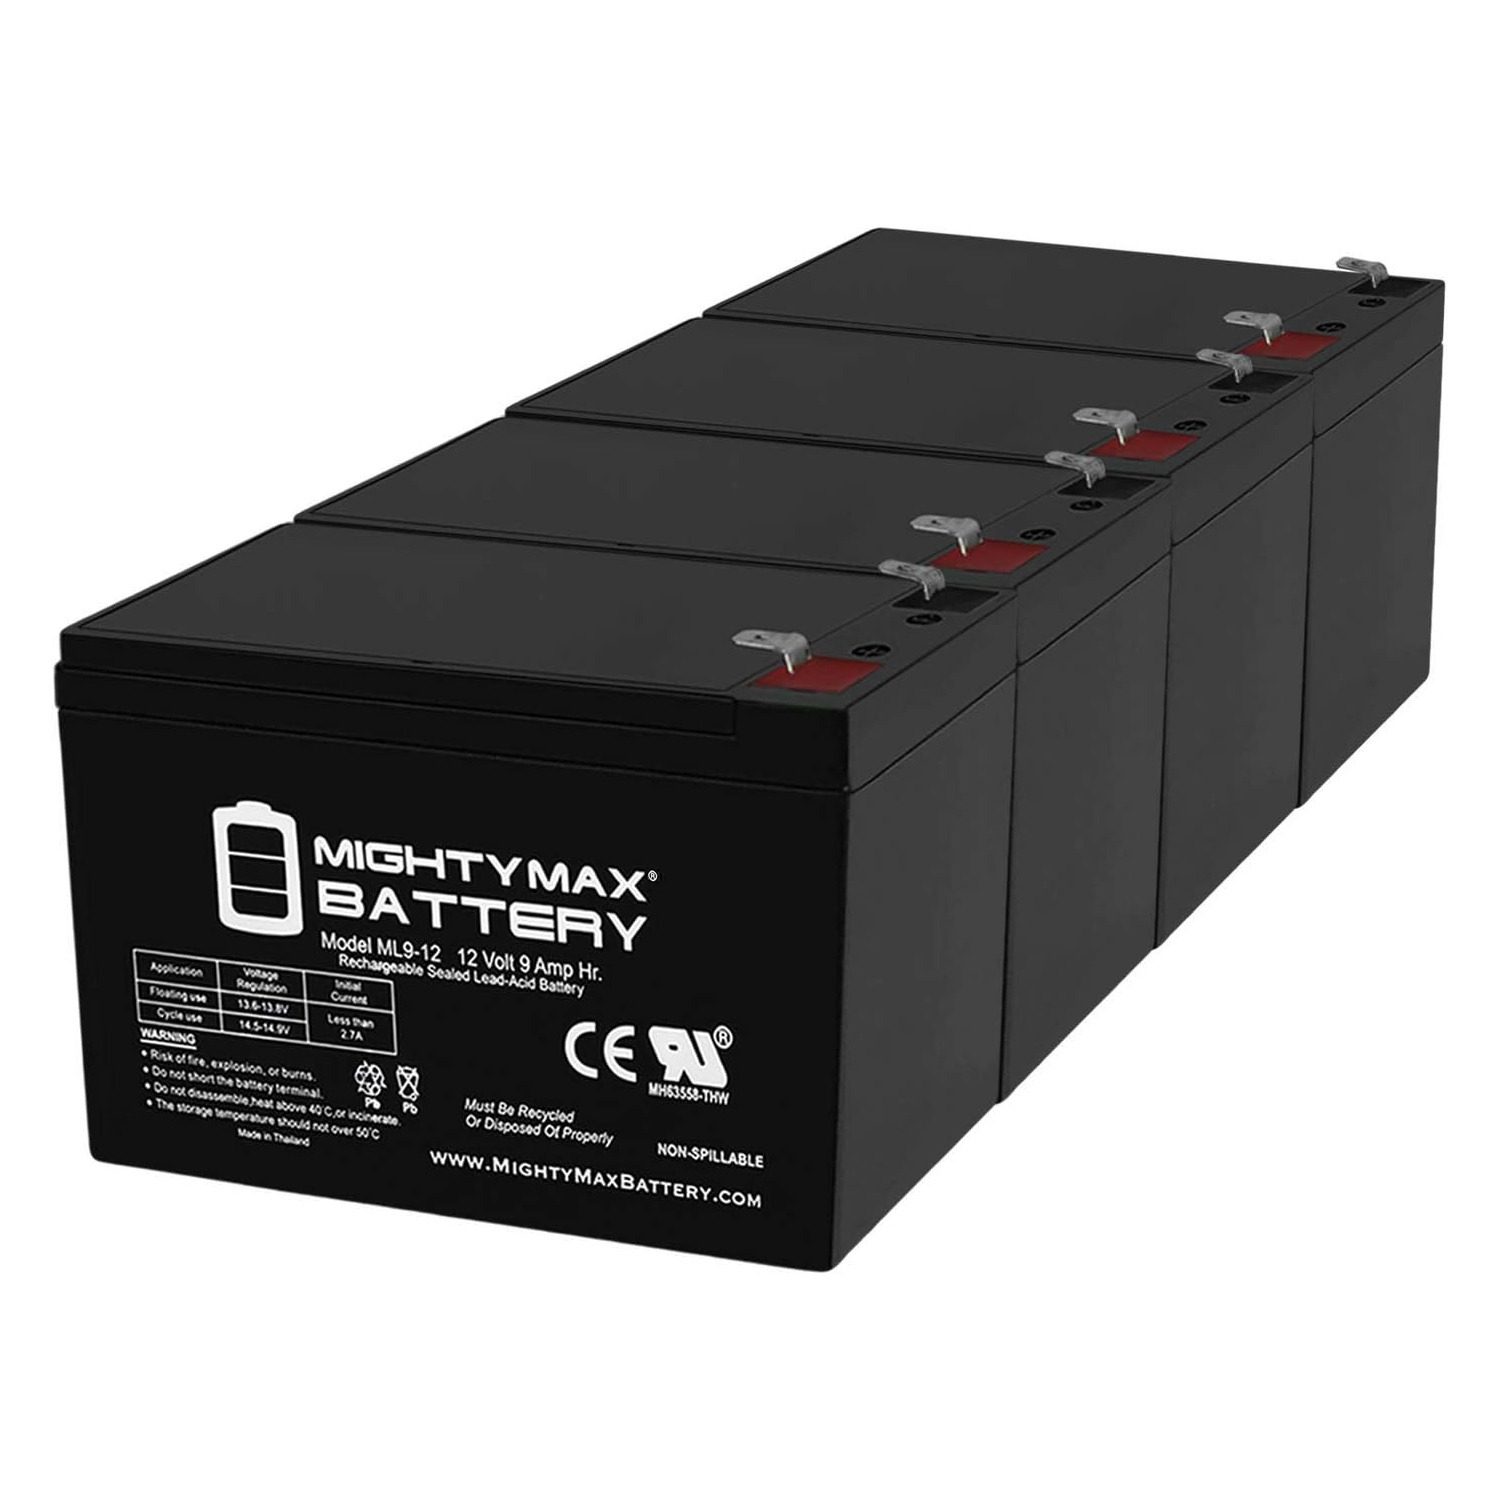 Altronix SMP3PMCTXPD16 12V, 9Ah Lead Acid Battery - 4 Pack